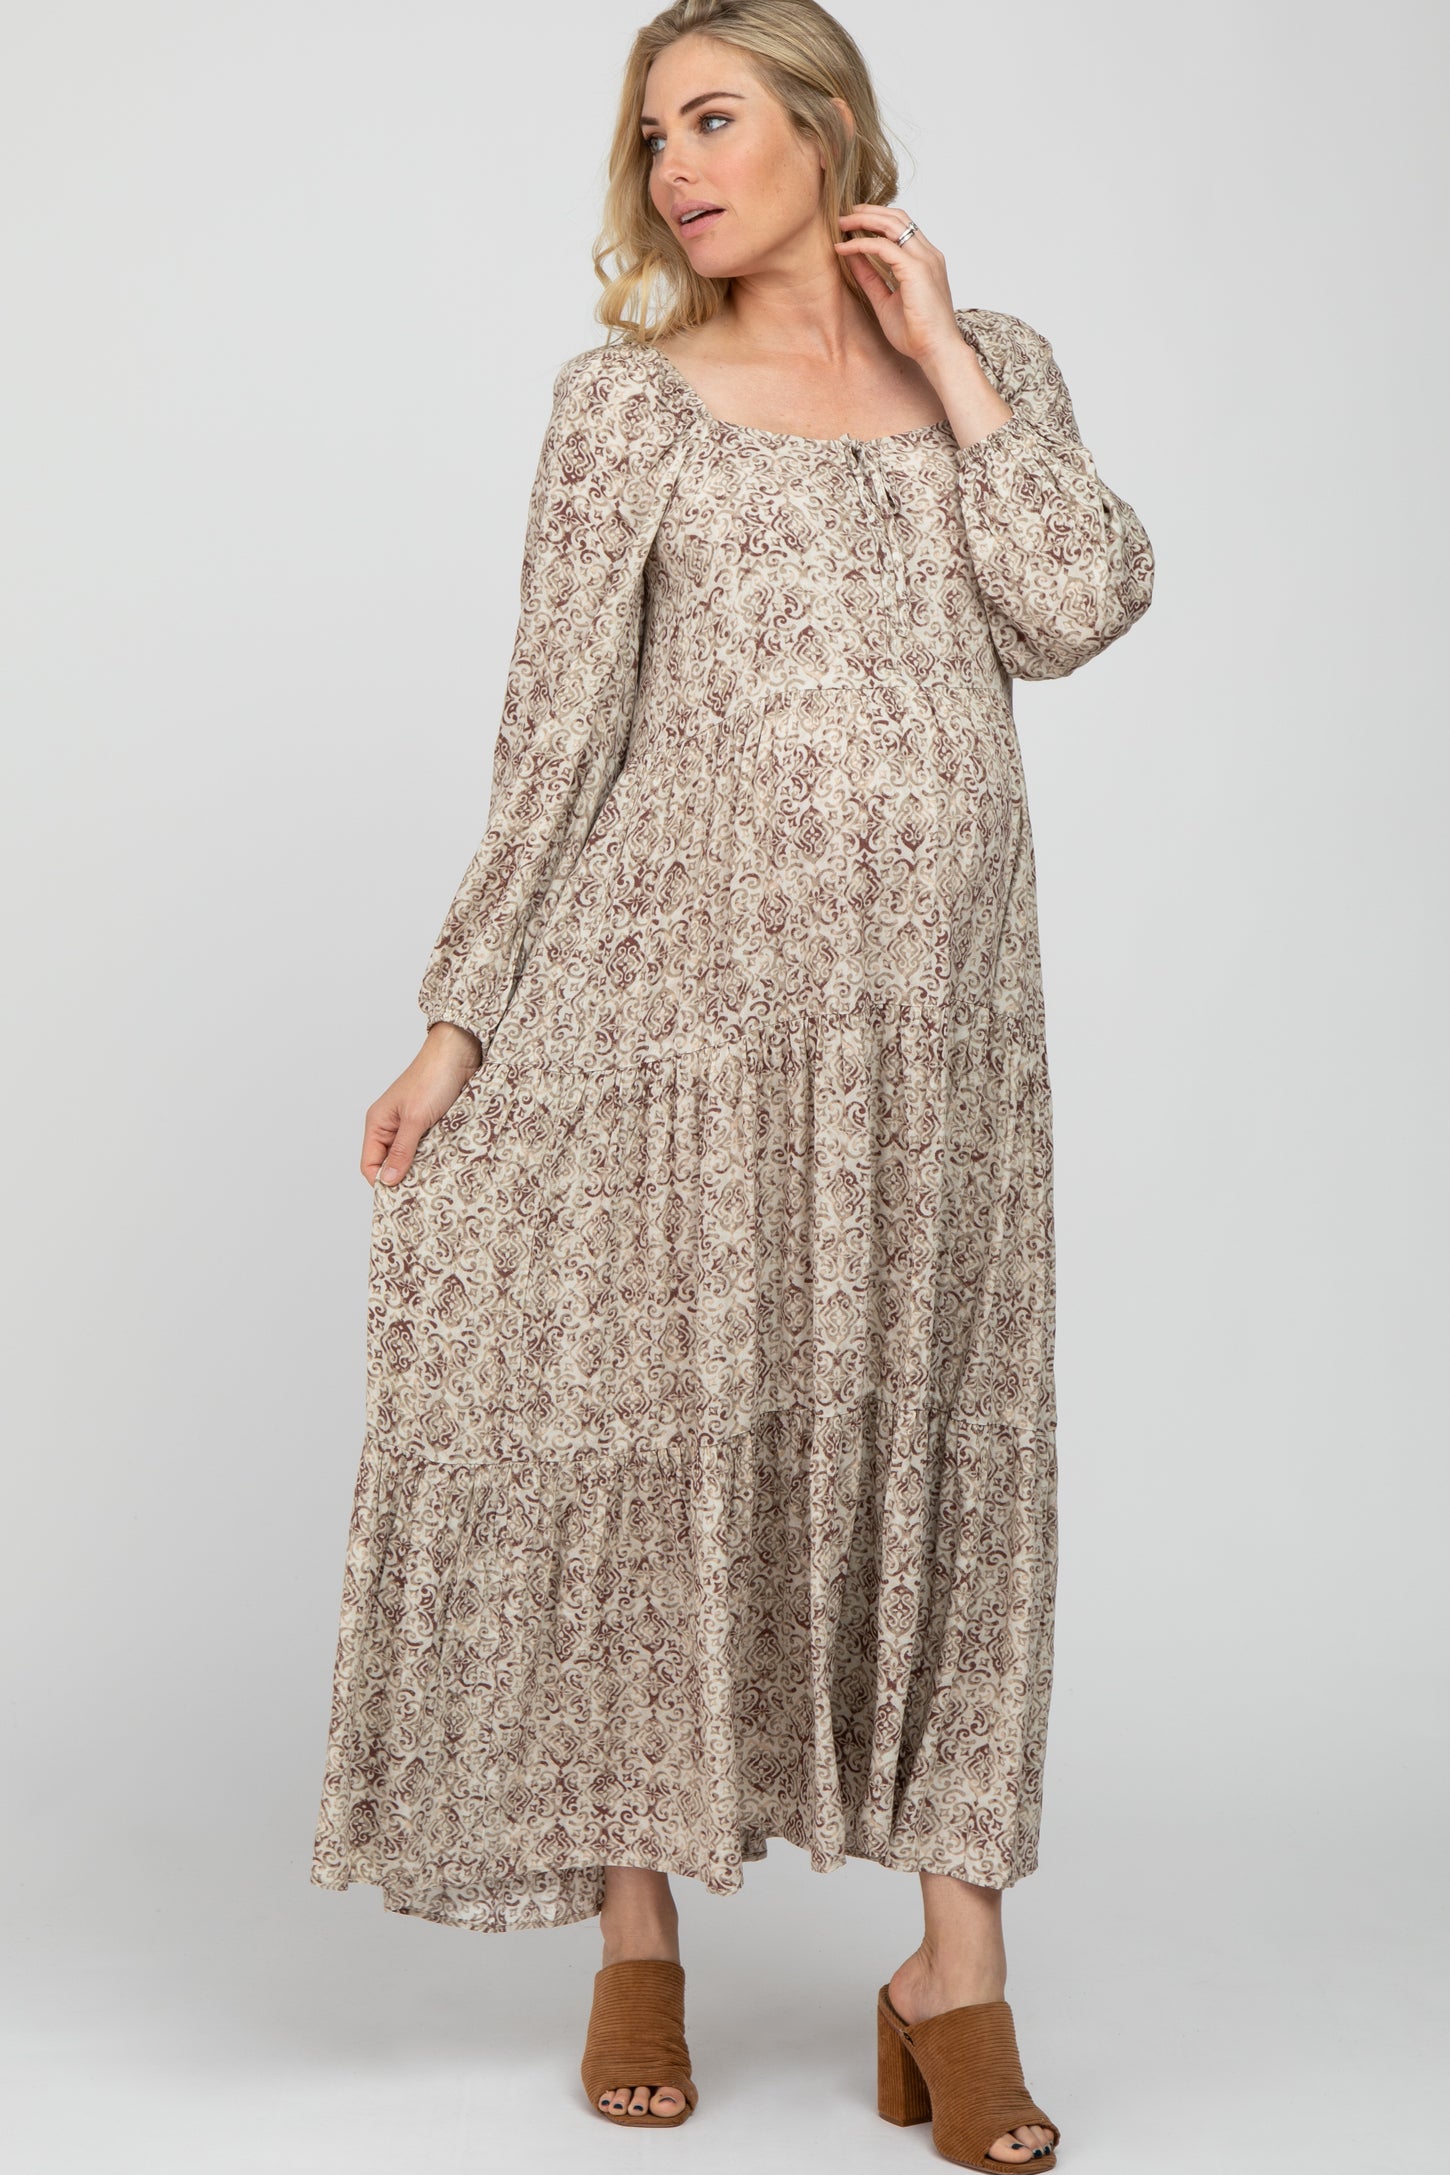 Beige Stamped Print Front Tie Tiered Maternity Maxi Dress